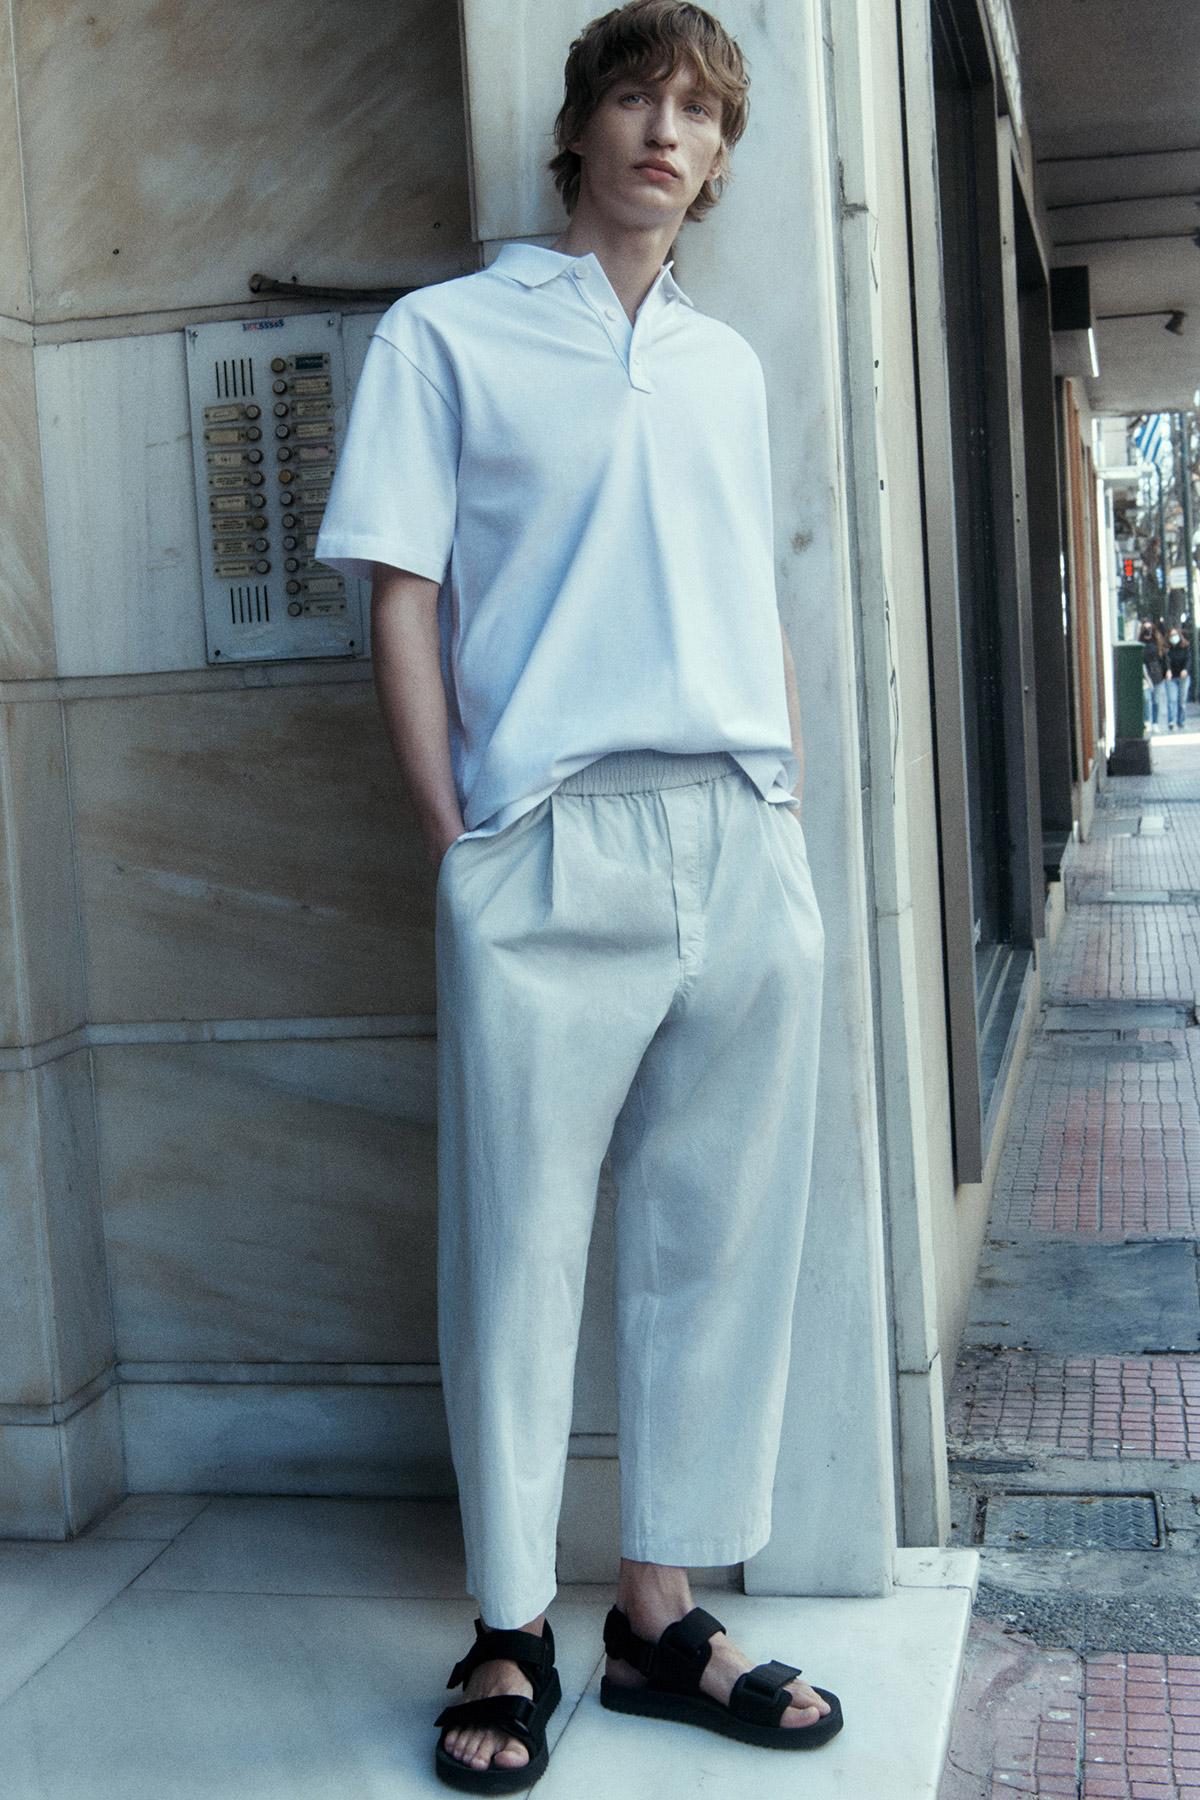 Core by COS Men Summer 2021 Ad Campaign by Robin Galiegue. Clothing & Accessories: COS WHITE POLO SHIRT / COS MOLE GREY ELASTICATED TAPERED PANTS / COS BLACK STRAP SANDALS